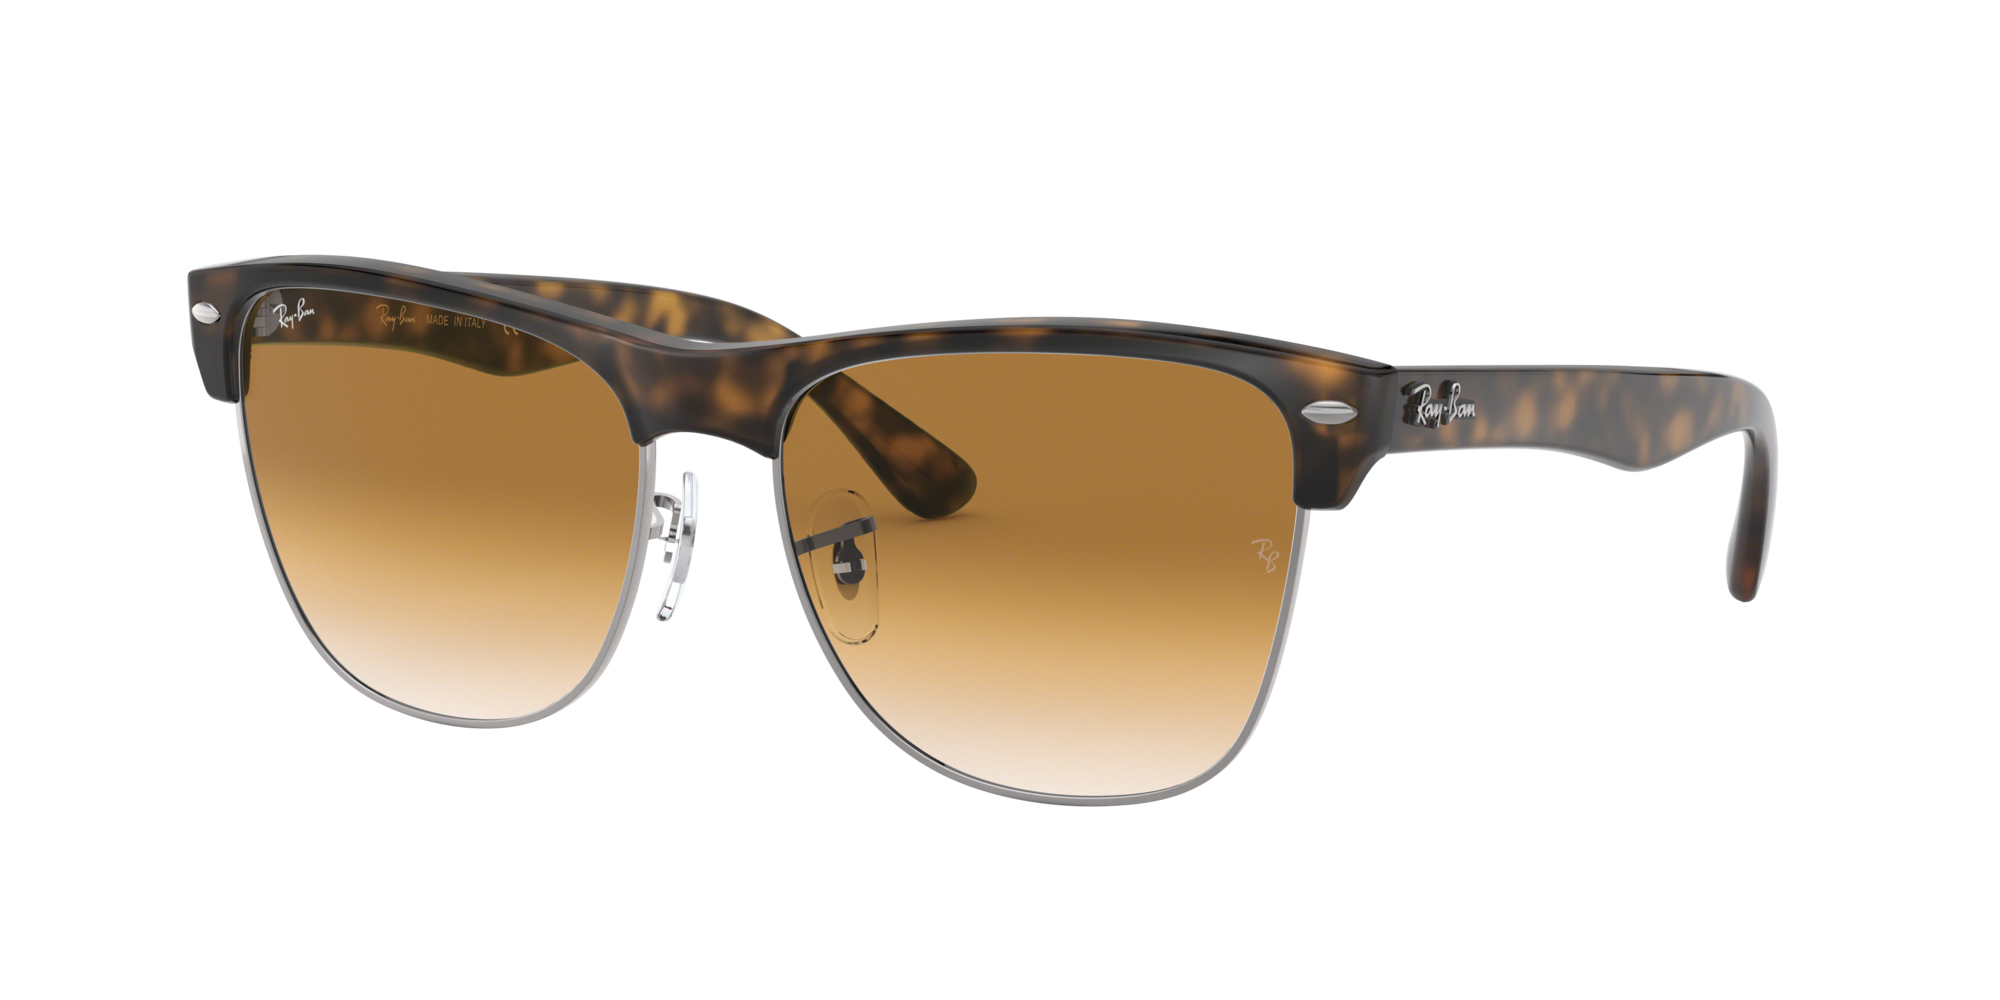 ray ban tortoise shell clubmaster